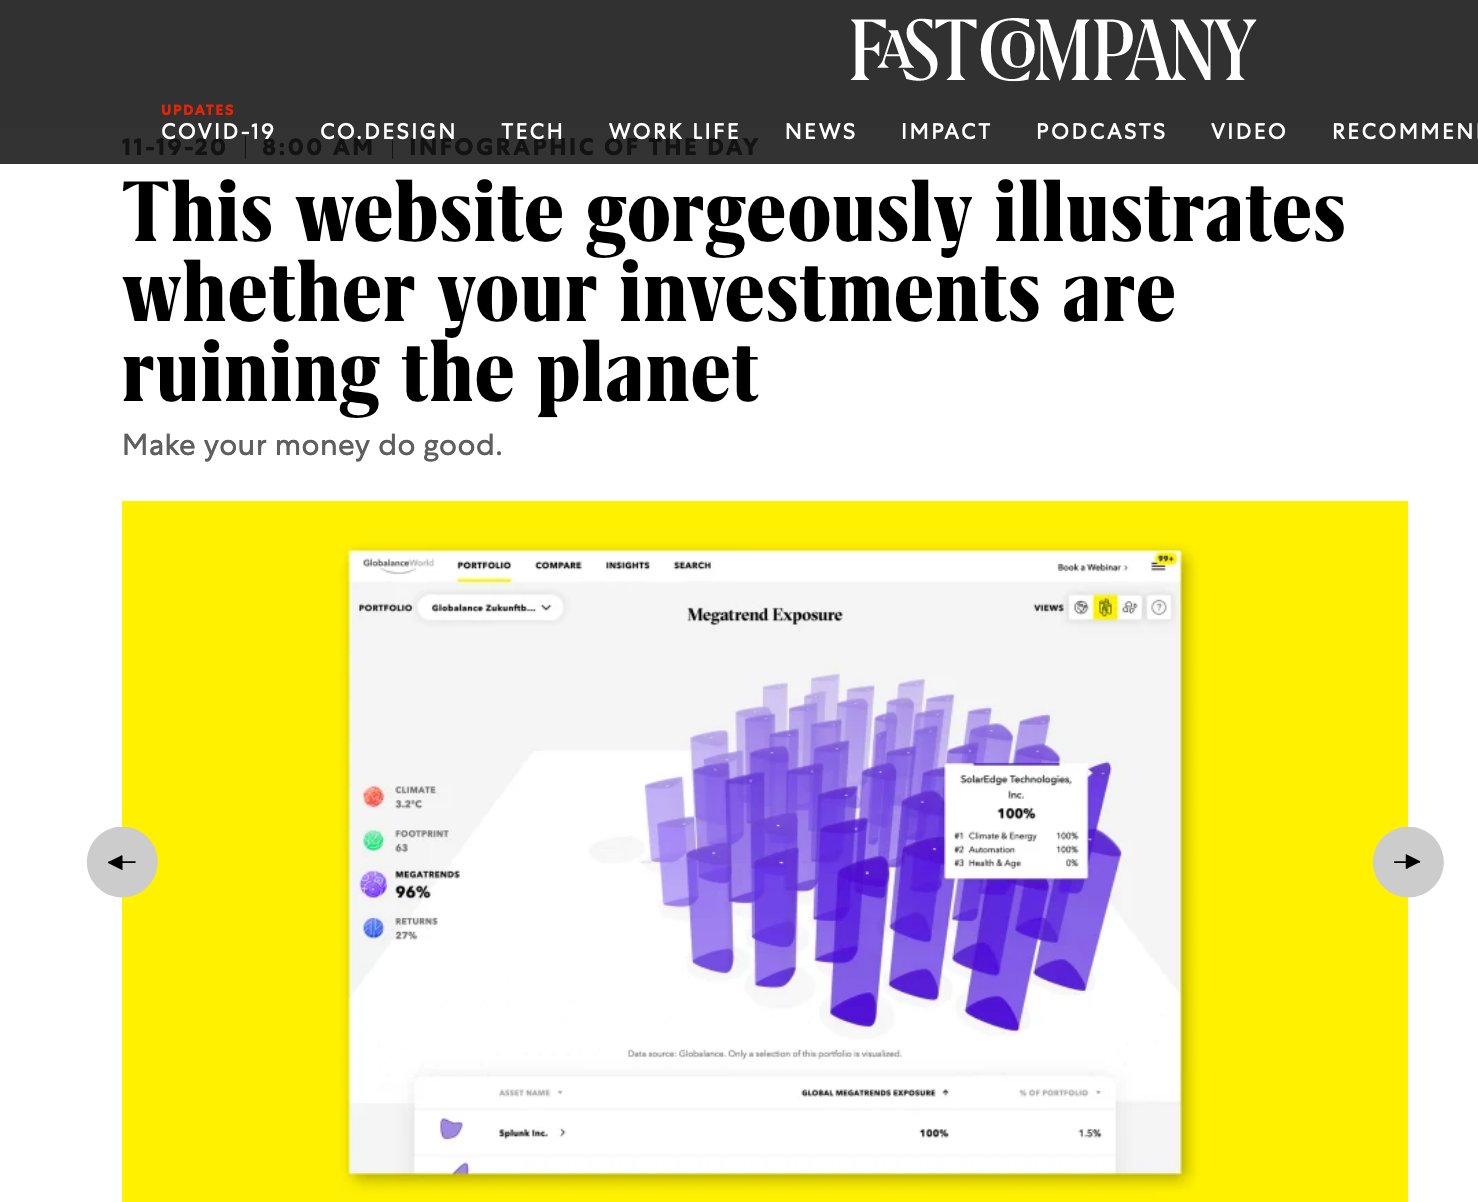 Image for Fast Company publicity item